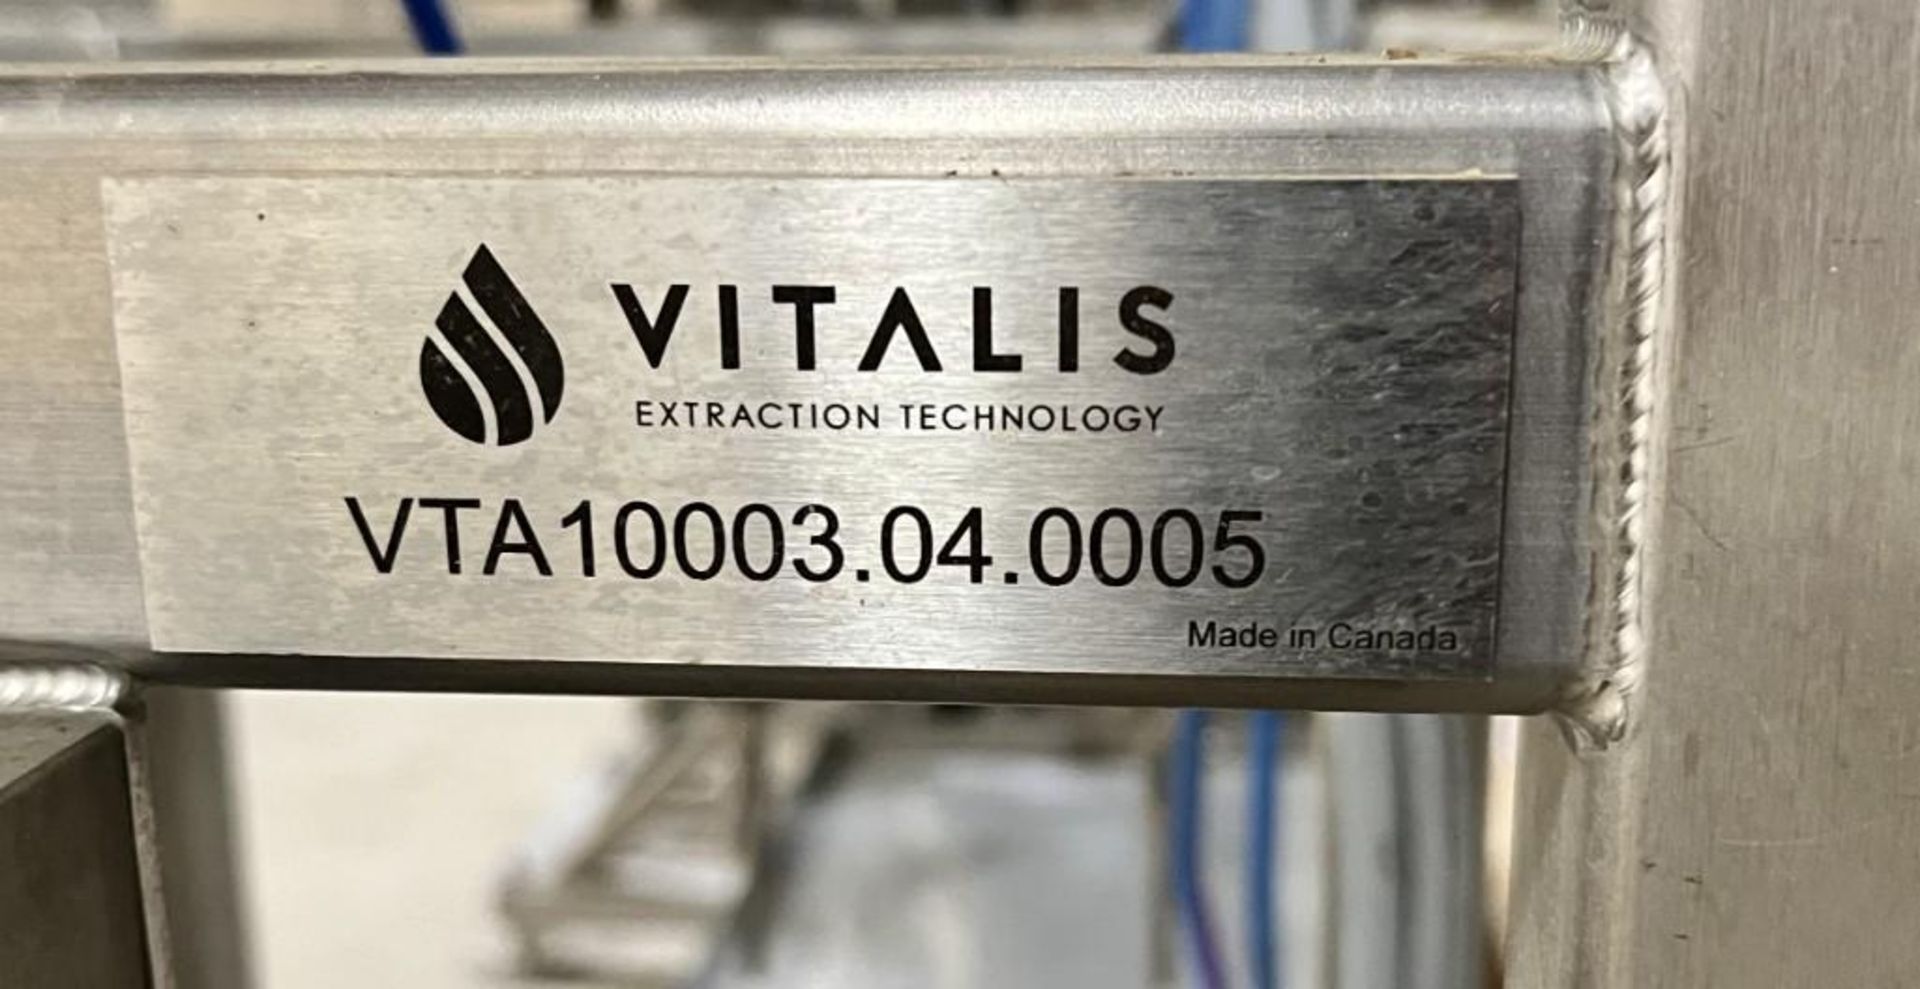 Vitalis Extraction Technology R-Series CO2 Extraction System, Model R200H. (2) Extraction vessels, ( - Image 44 of 44